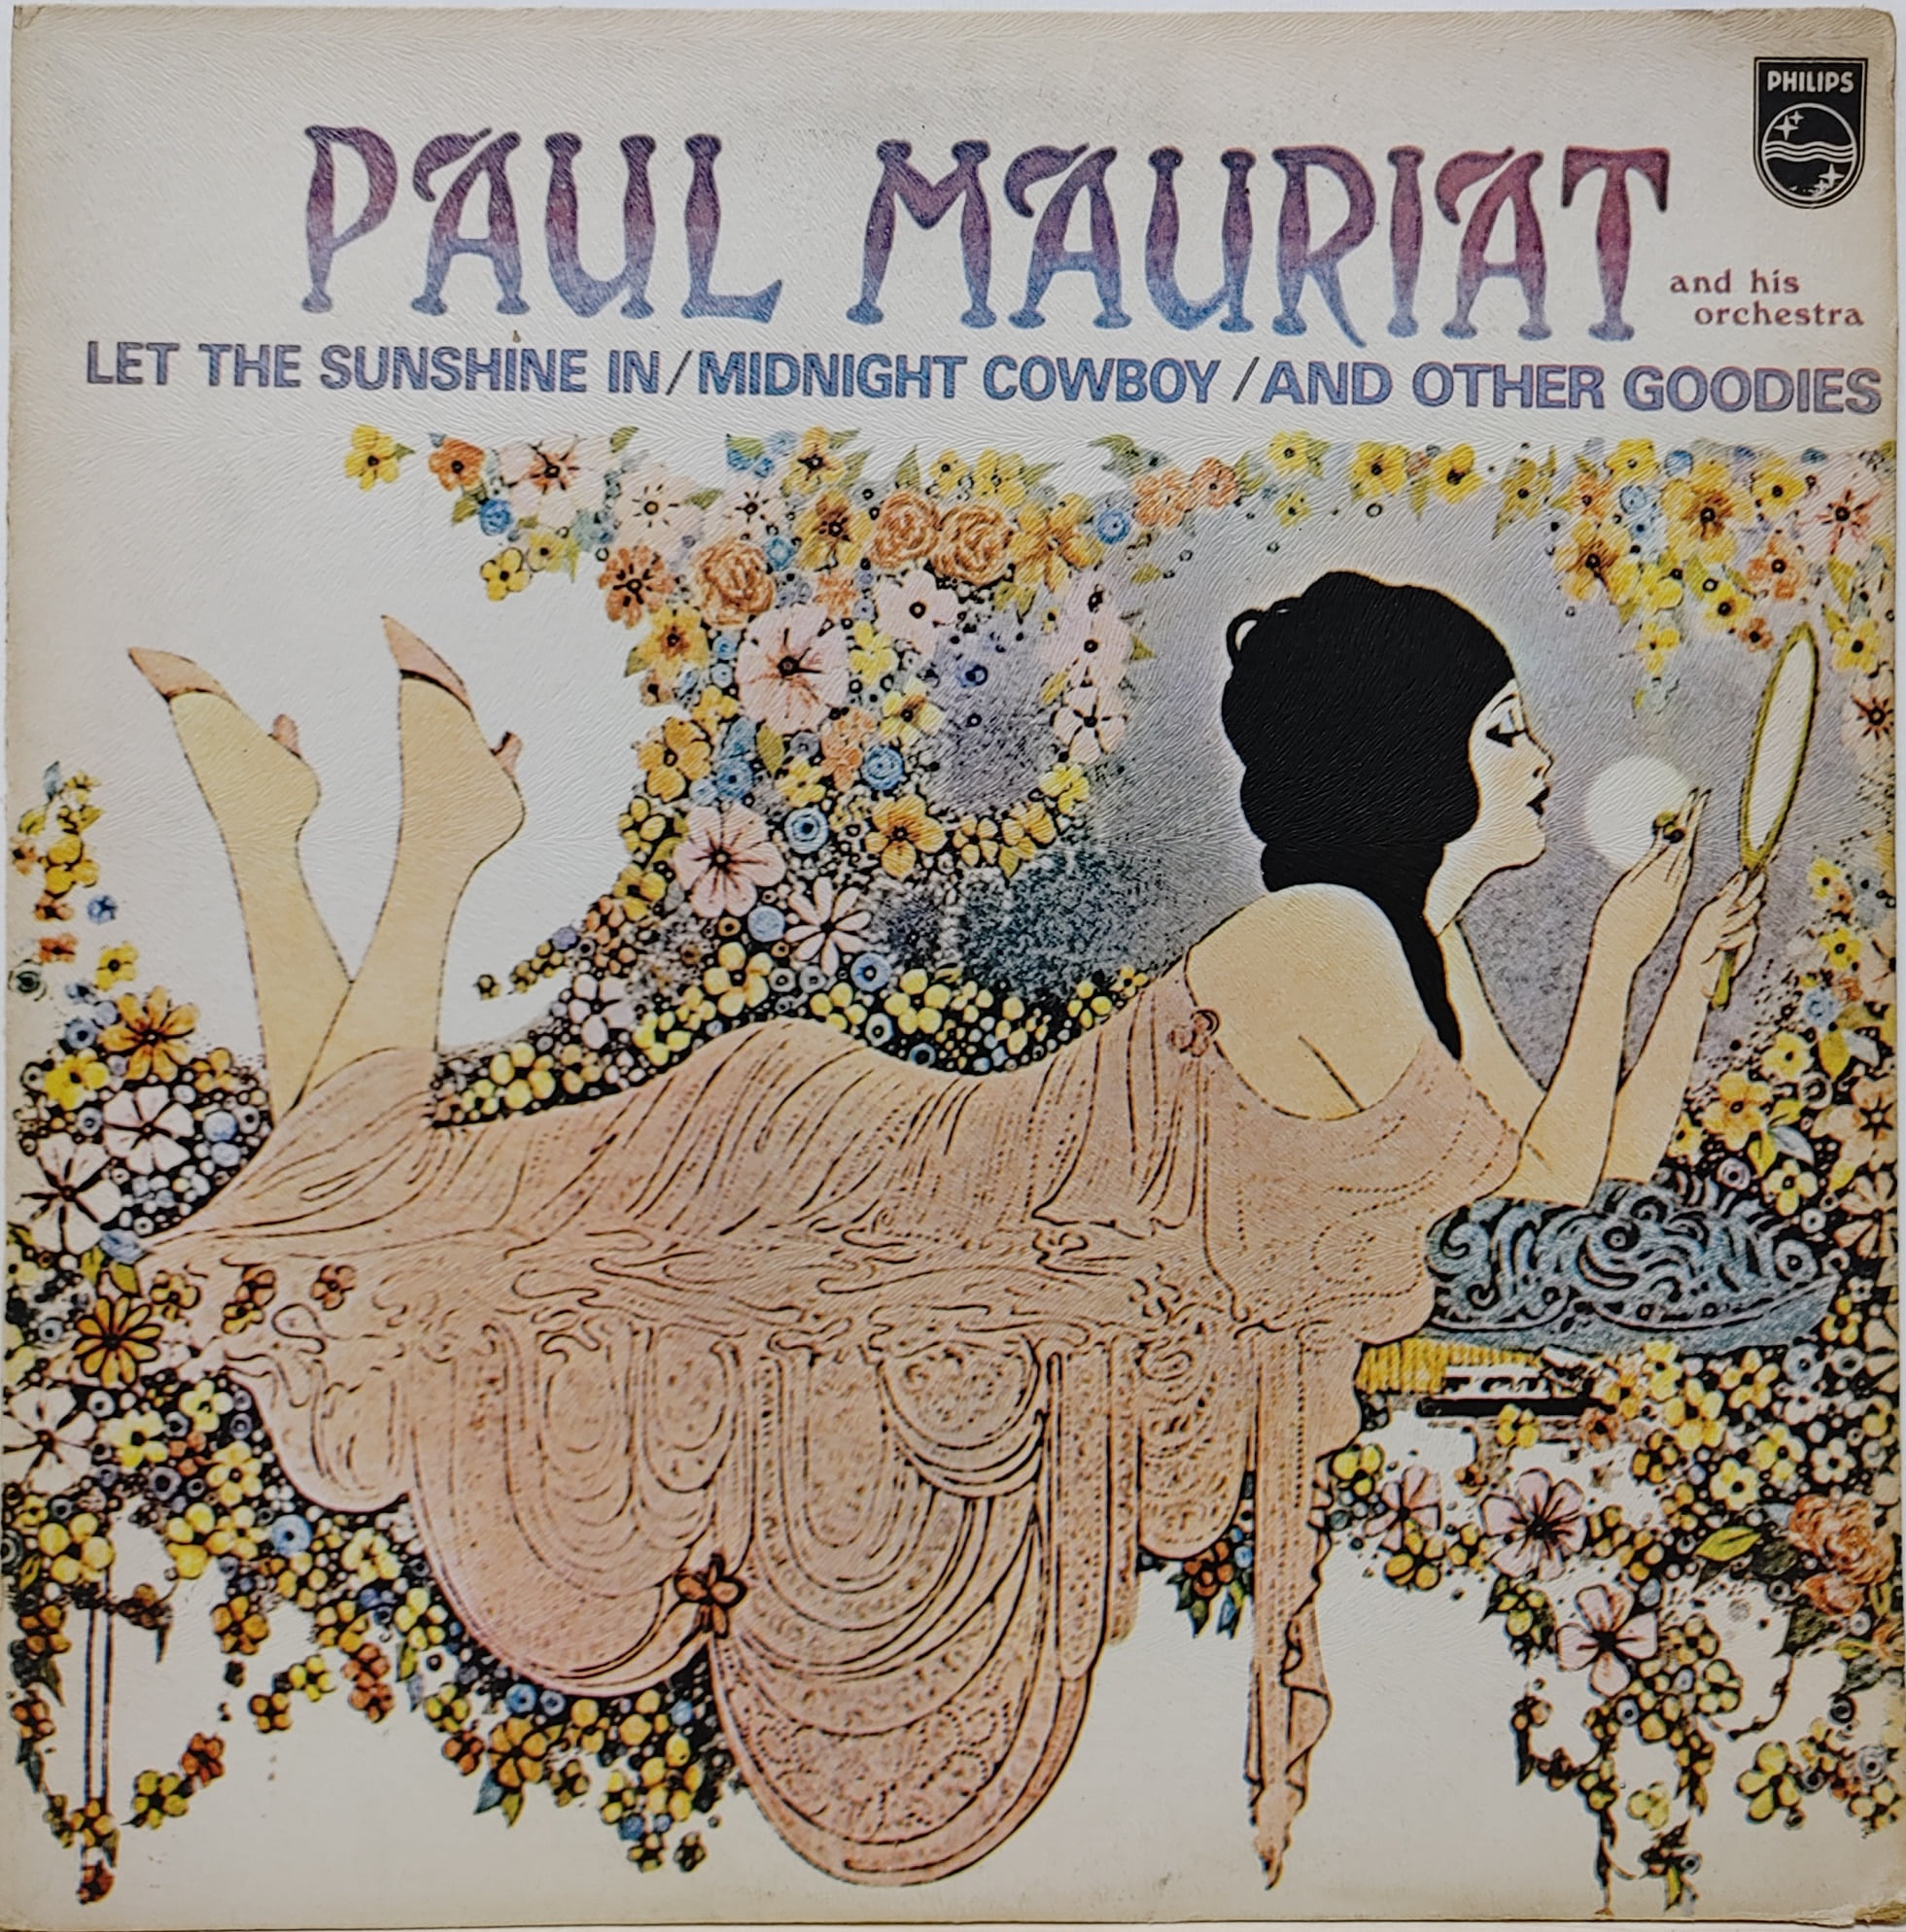 PAUL MAURIAT / LET THE SUNSHINE IN MIDNIGHT COWBOY ISADORA